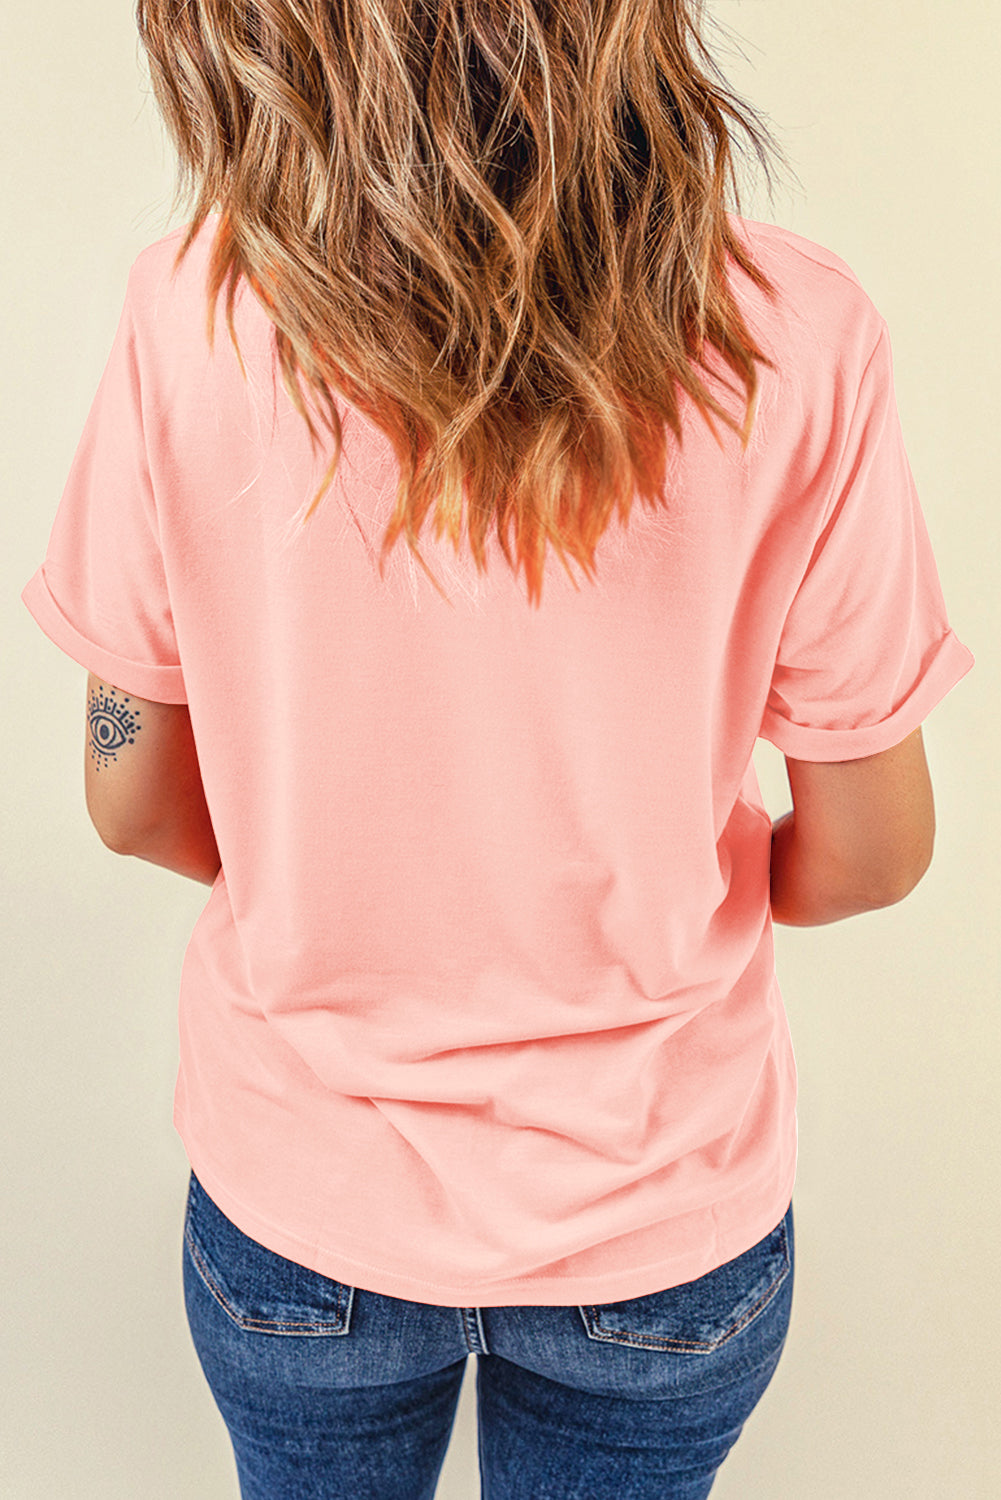 Pink Easter Rabbit Print Round Neck Casual Tee